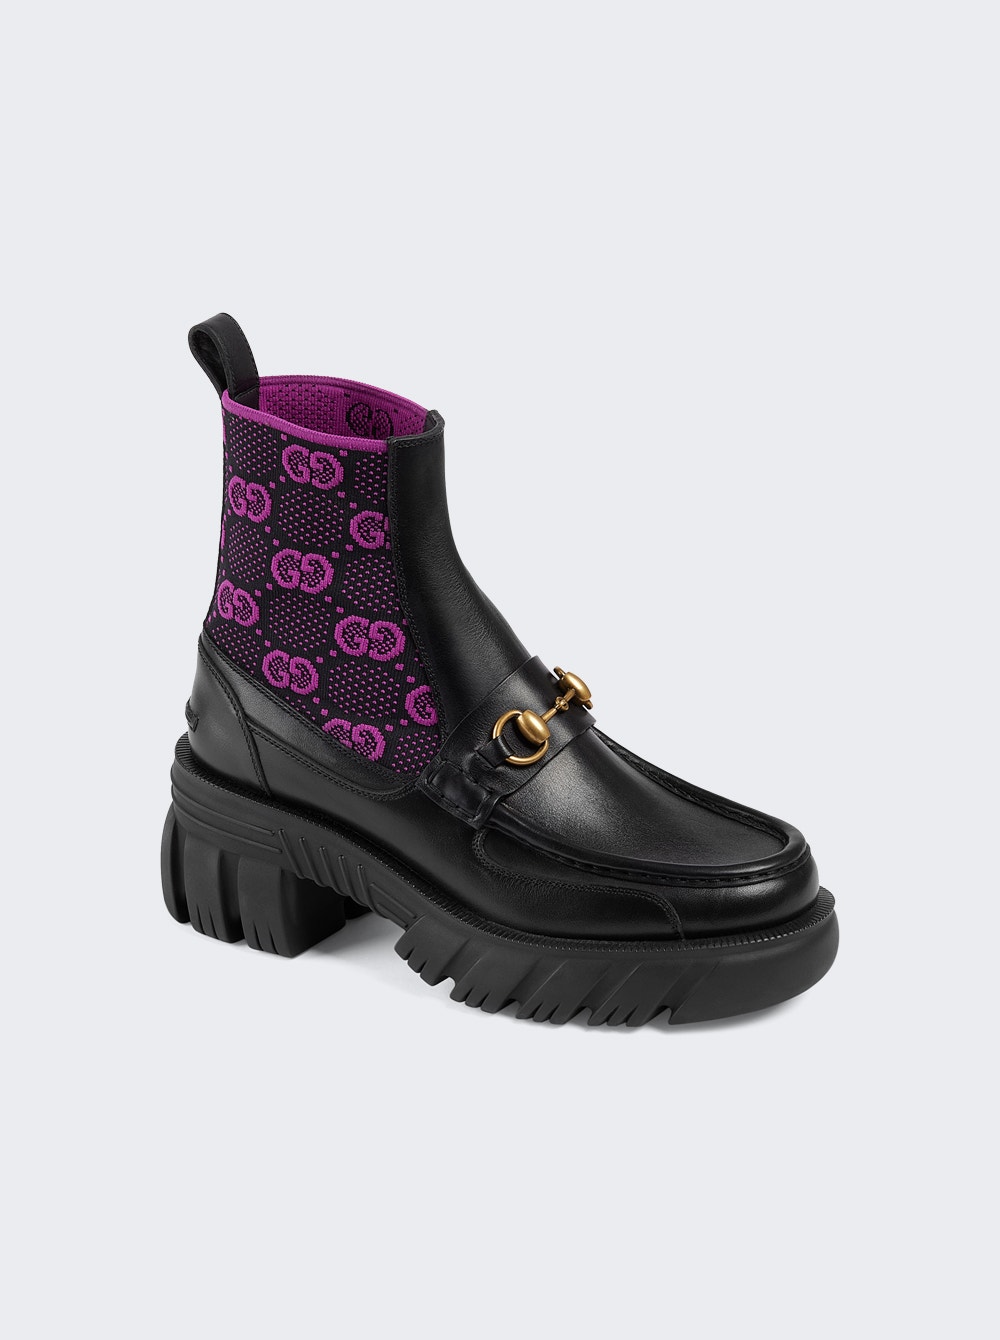 Women's Designer Boots by Gucci | The Webster